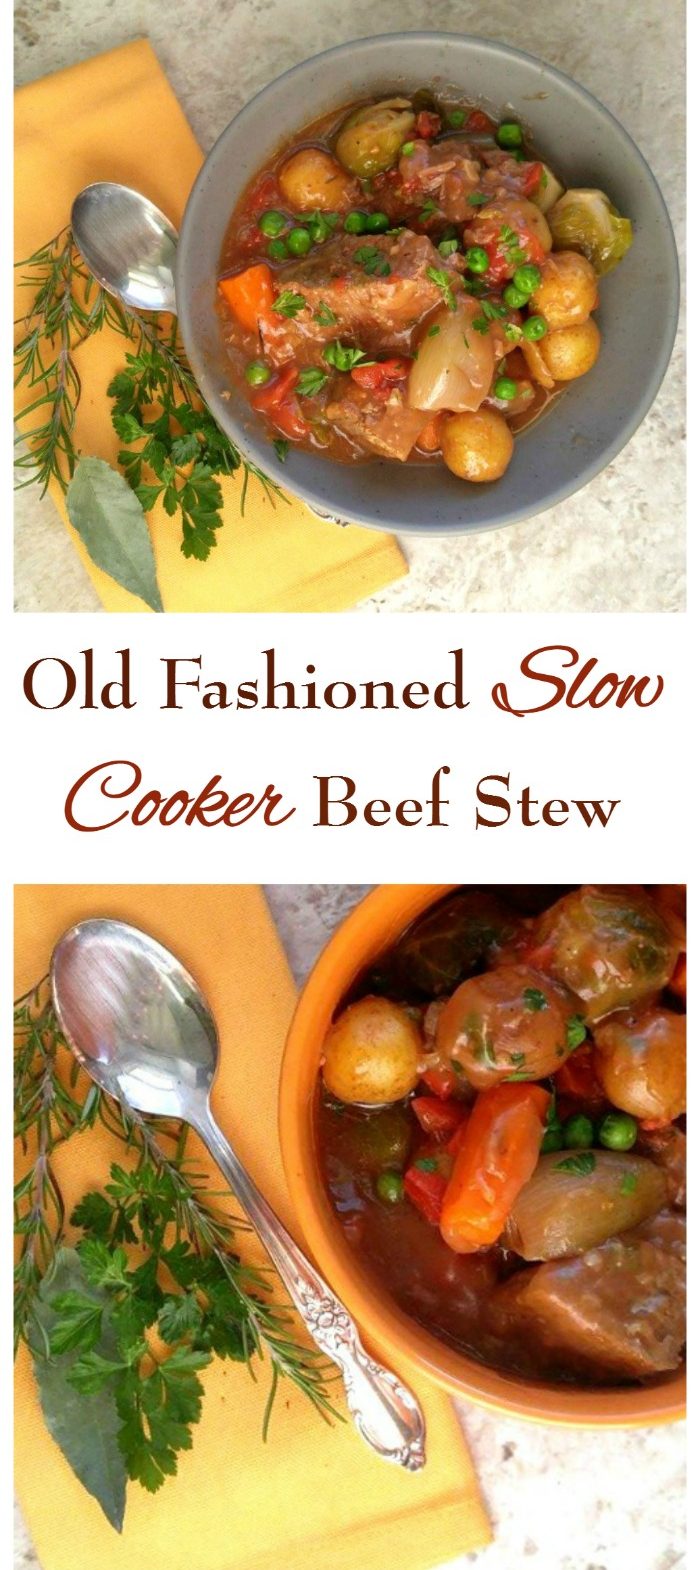 This fork tender old fashioned slow cooker beef stew is made just the way Momma made it! Rich and savory with big chunks of meat and vegetables are the ultimate comfort food.